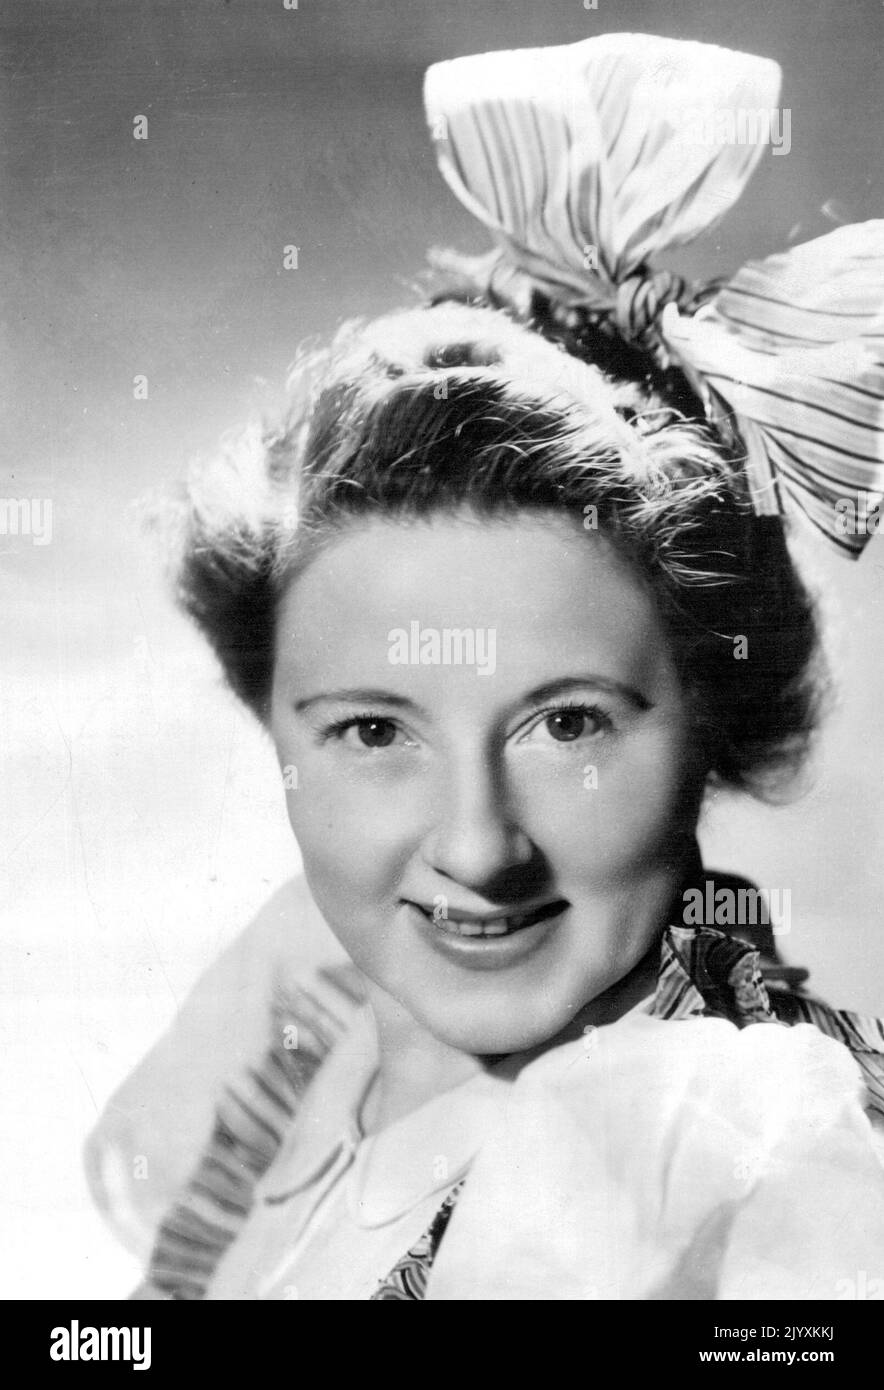 Bebe Scott, child impersonator and dramatic actress, who will appear at the Masquerade Ball on Friday, October 16, at the Town Hall, in aid of a convalescent hut for the new 103rd AGH. October 02, 1942. Stock Photo